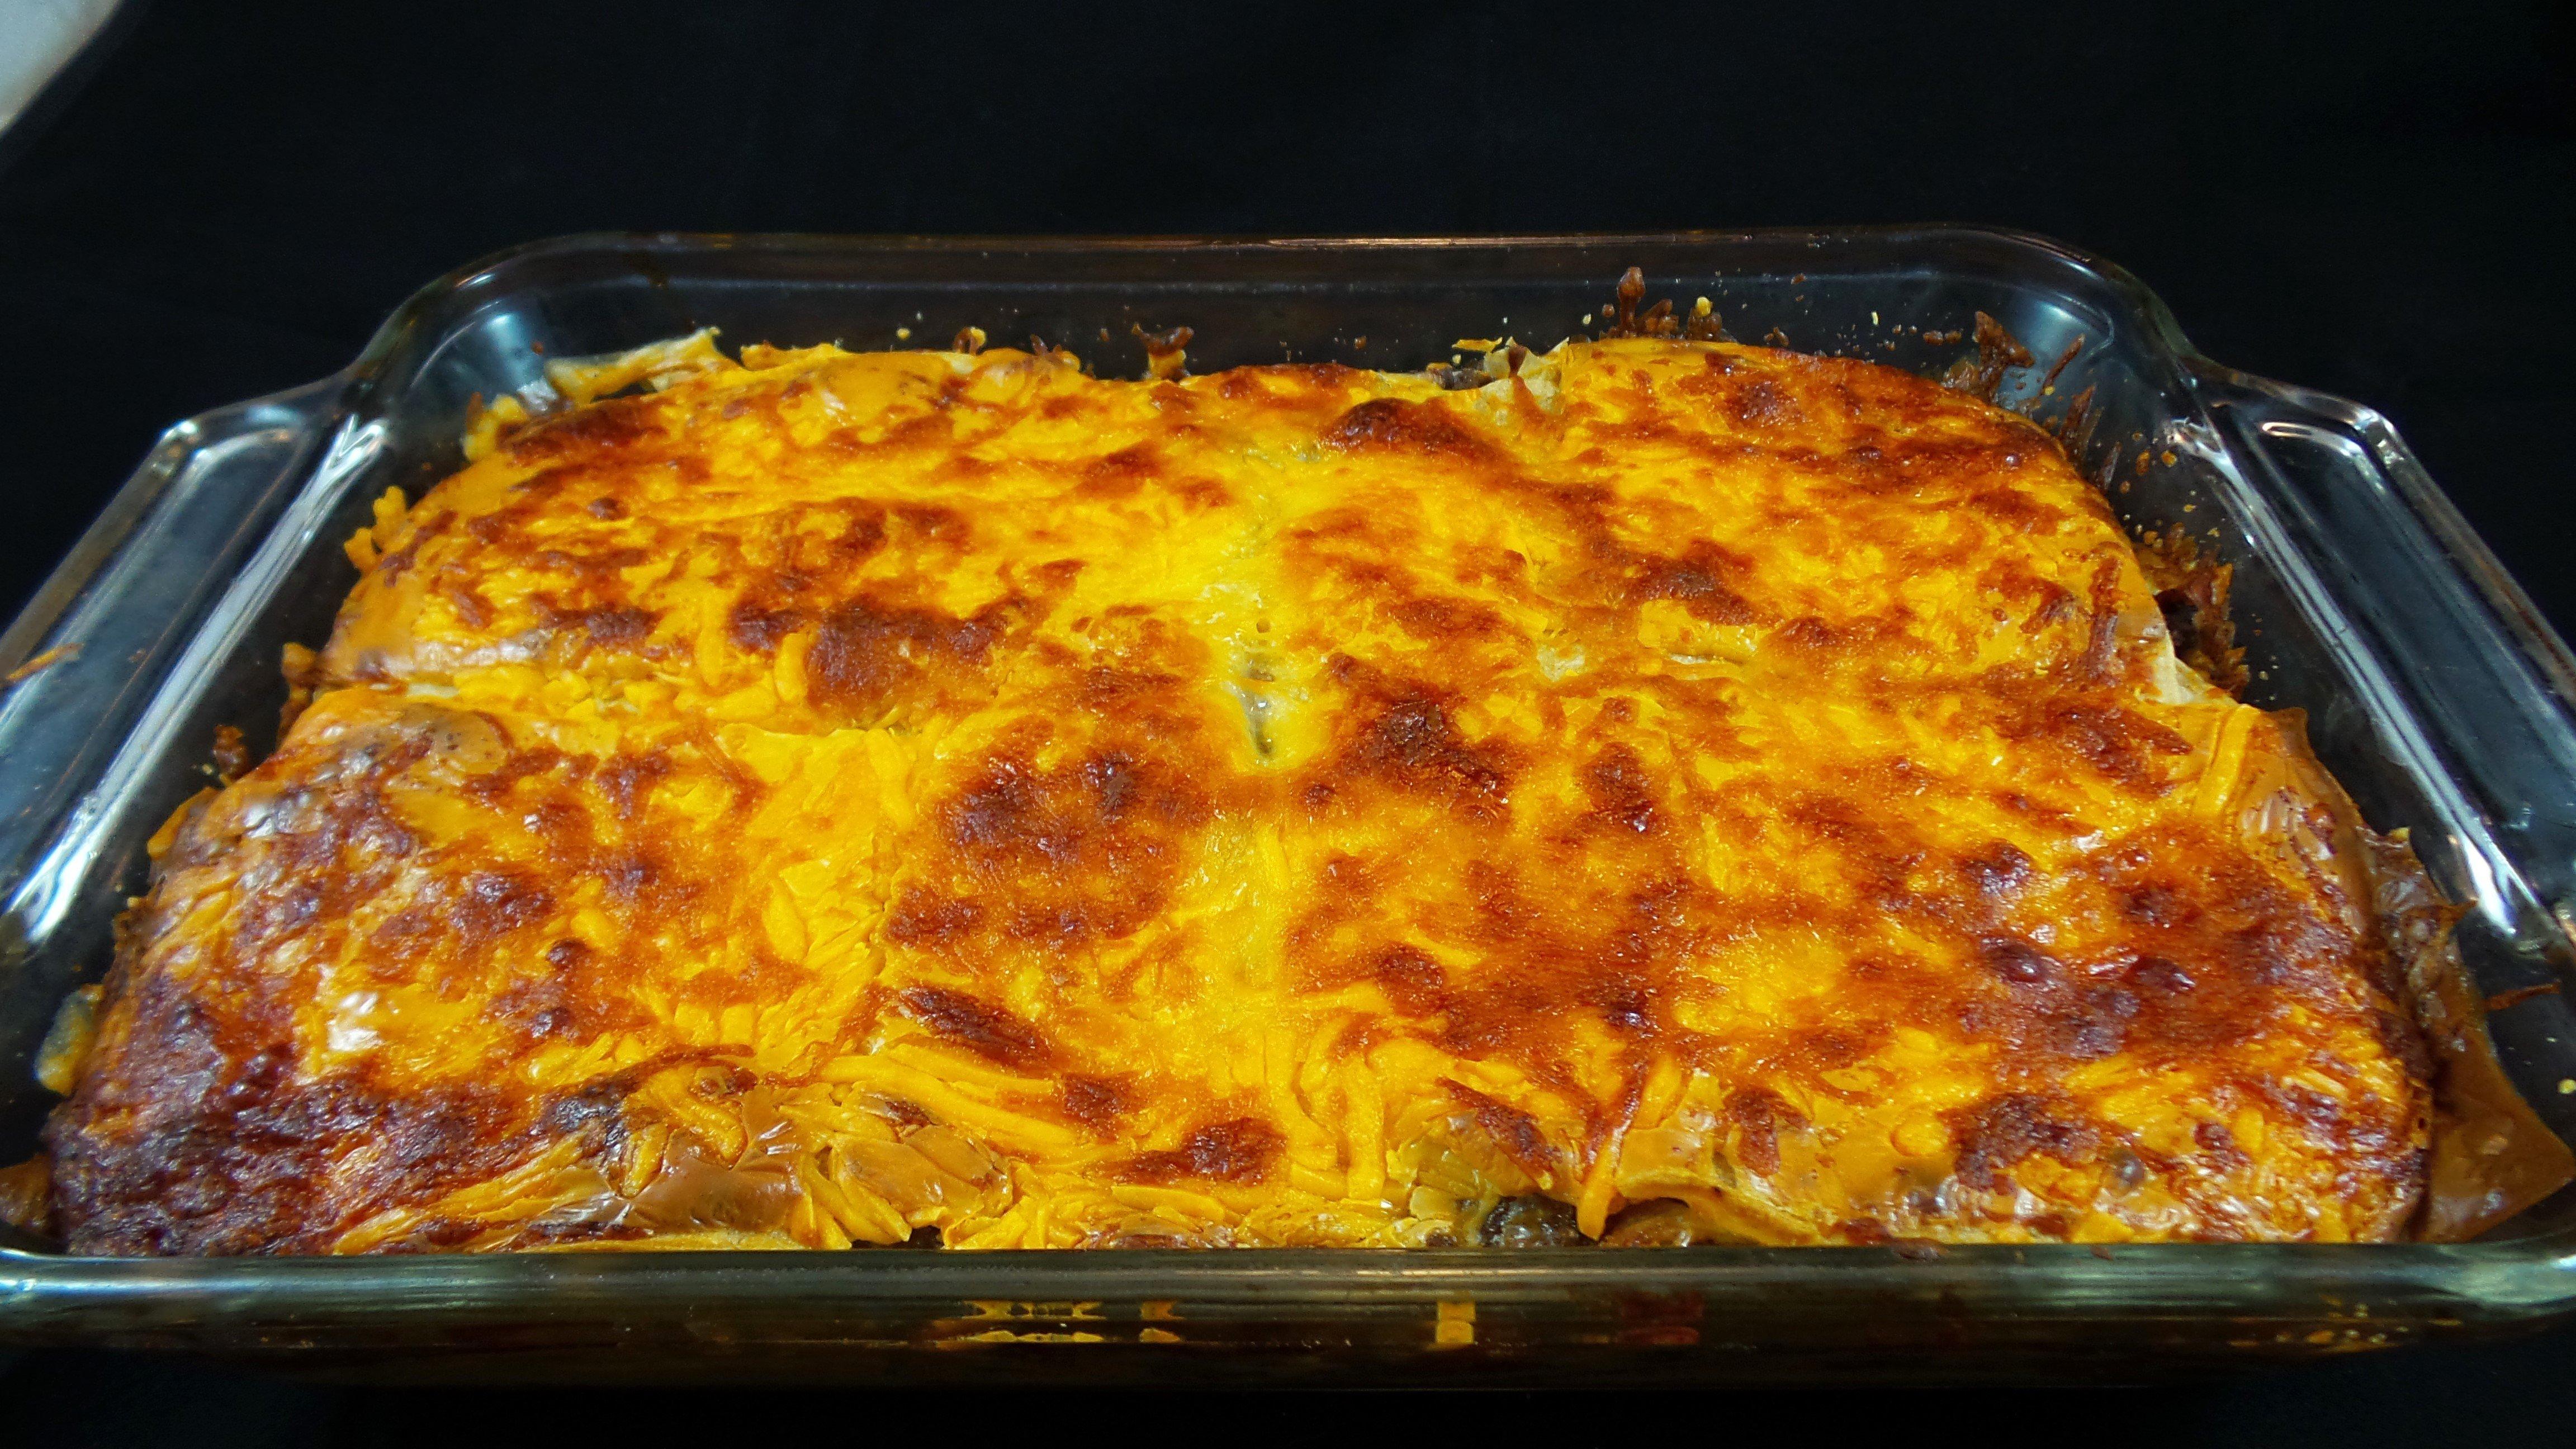 Bake until the lasagna is golden brown and the cheese has melted.